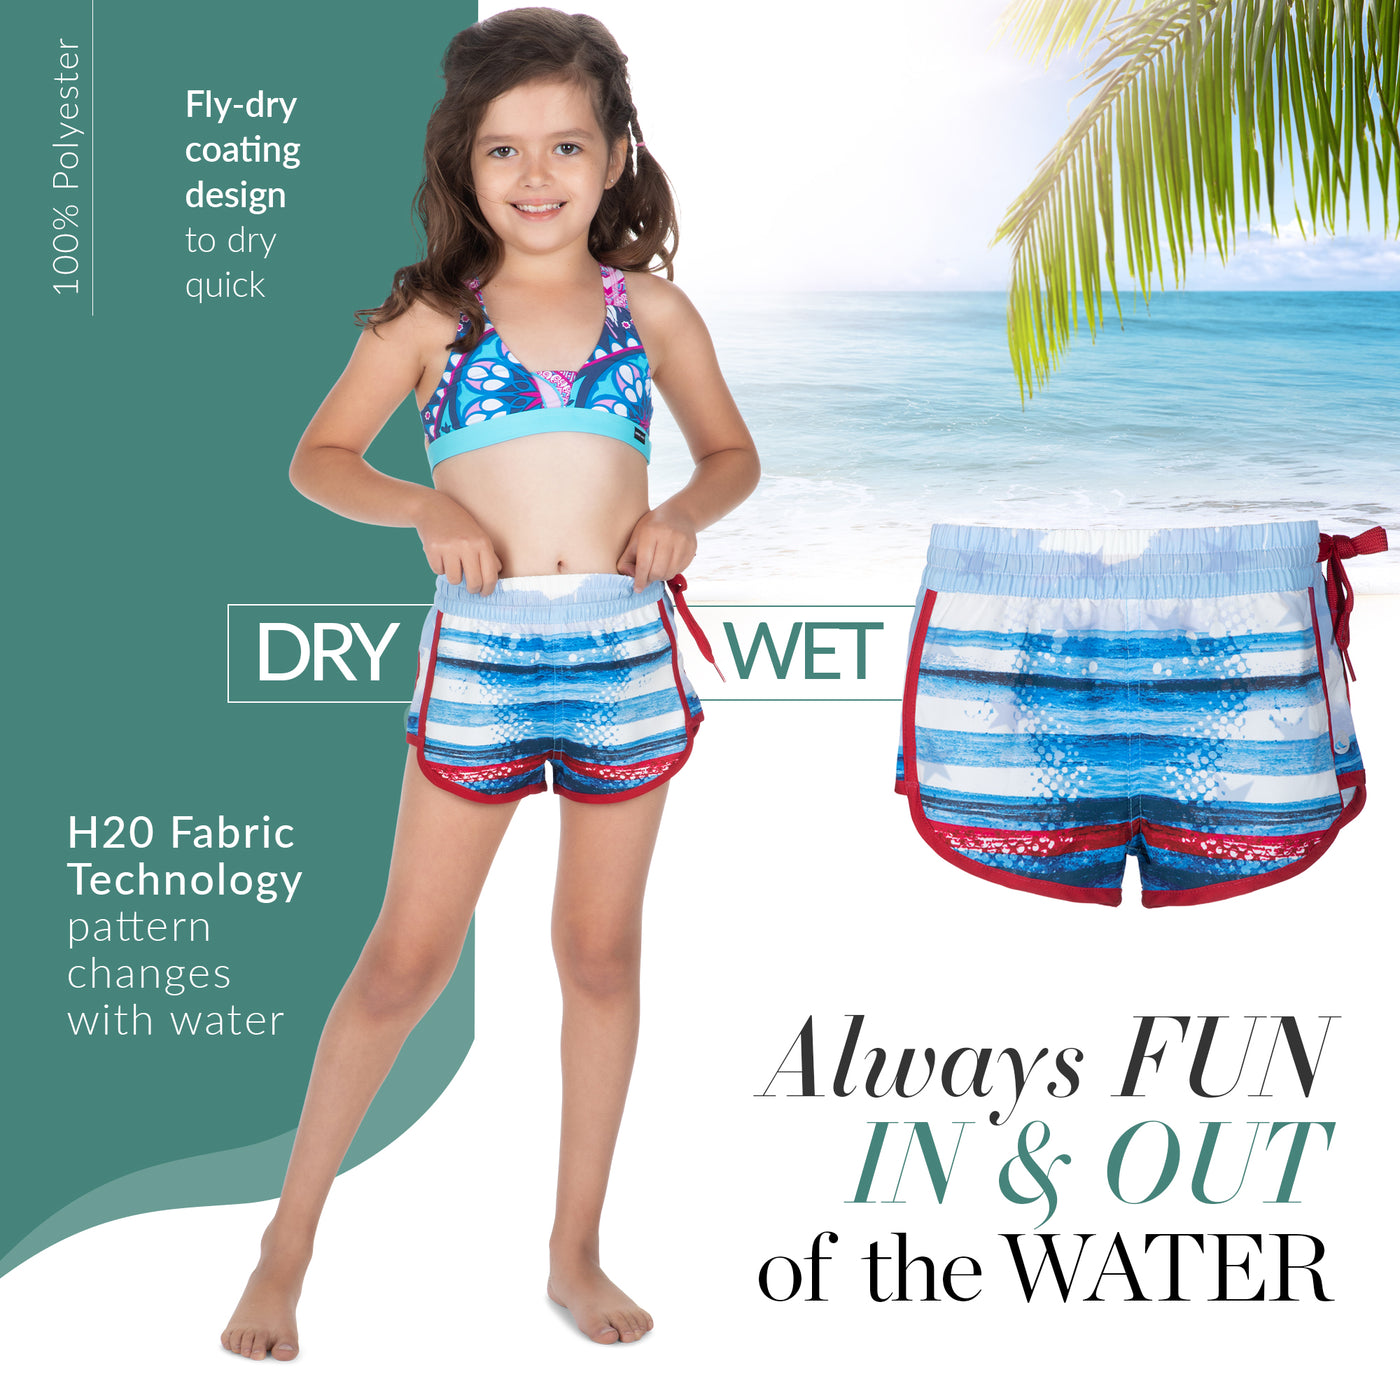 I Salute 2.5'' H2O Activated Side Tie Girls Short - Wavelife